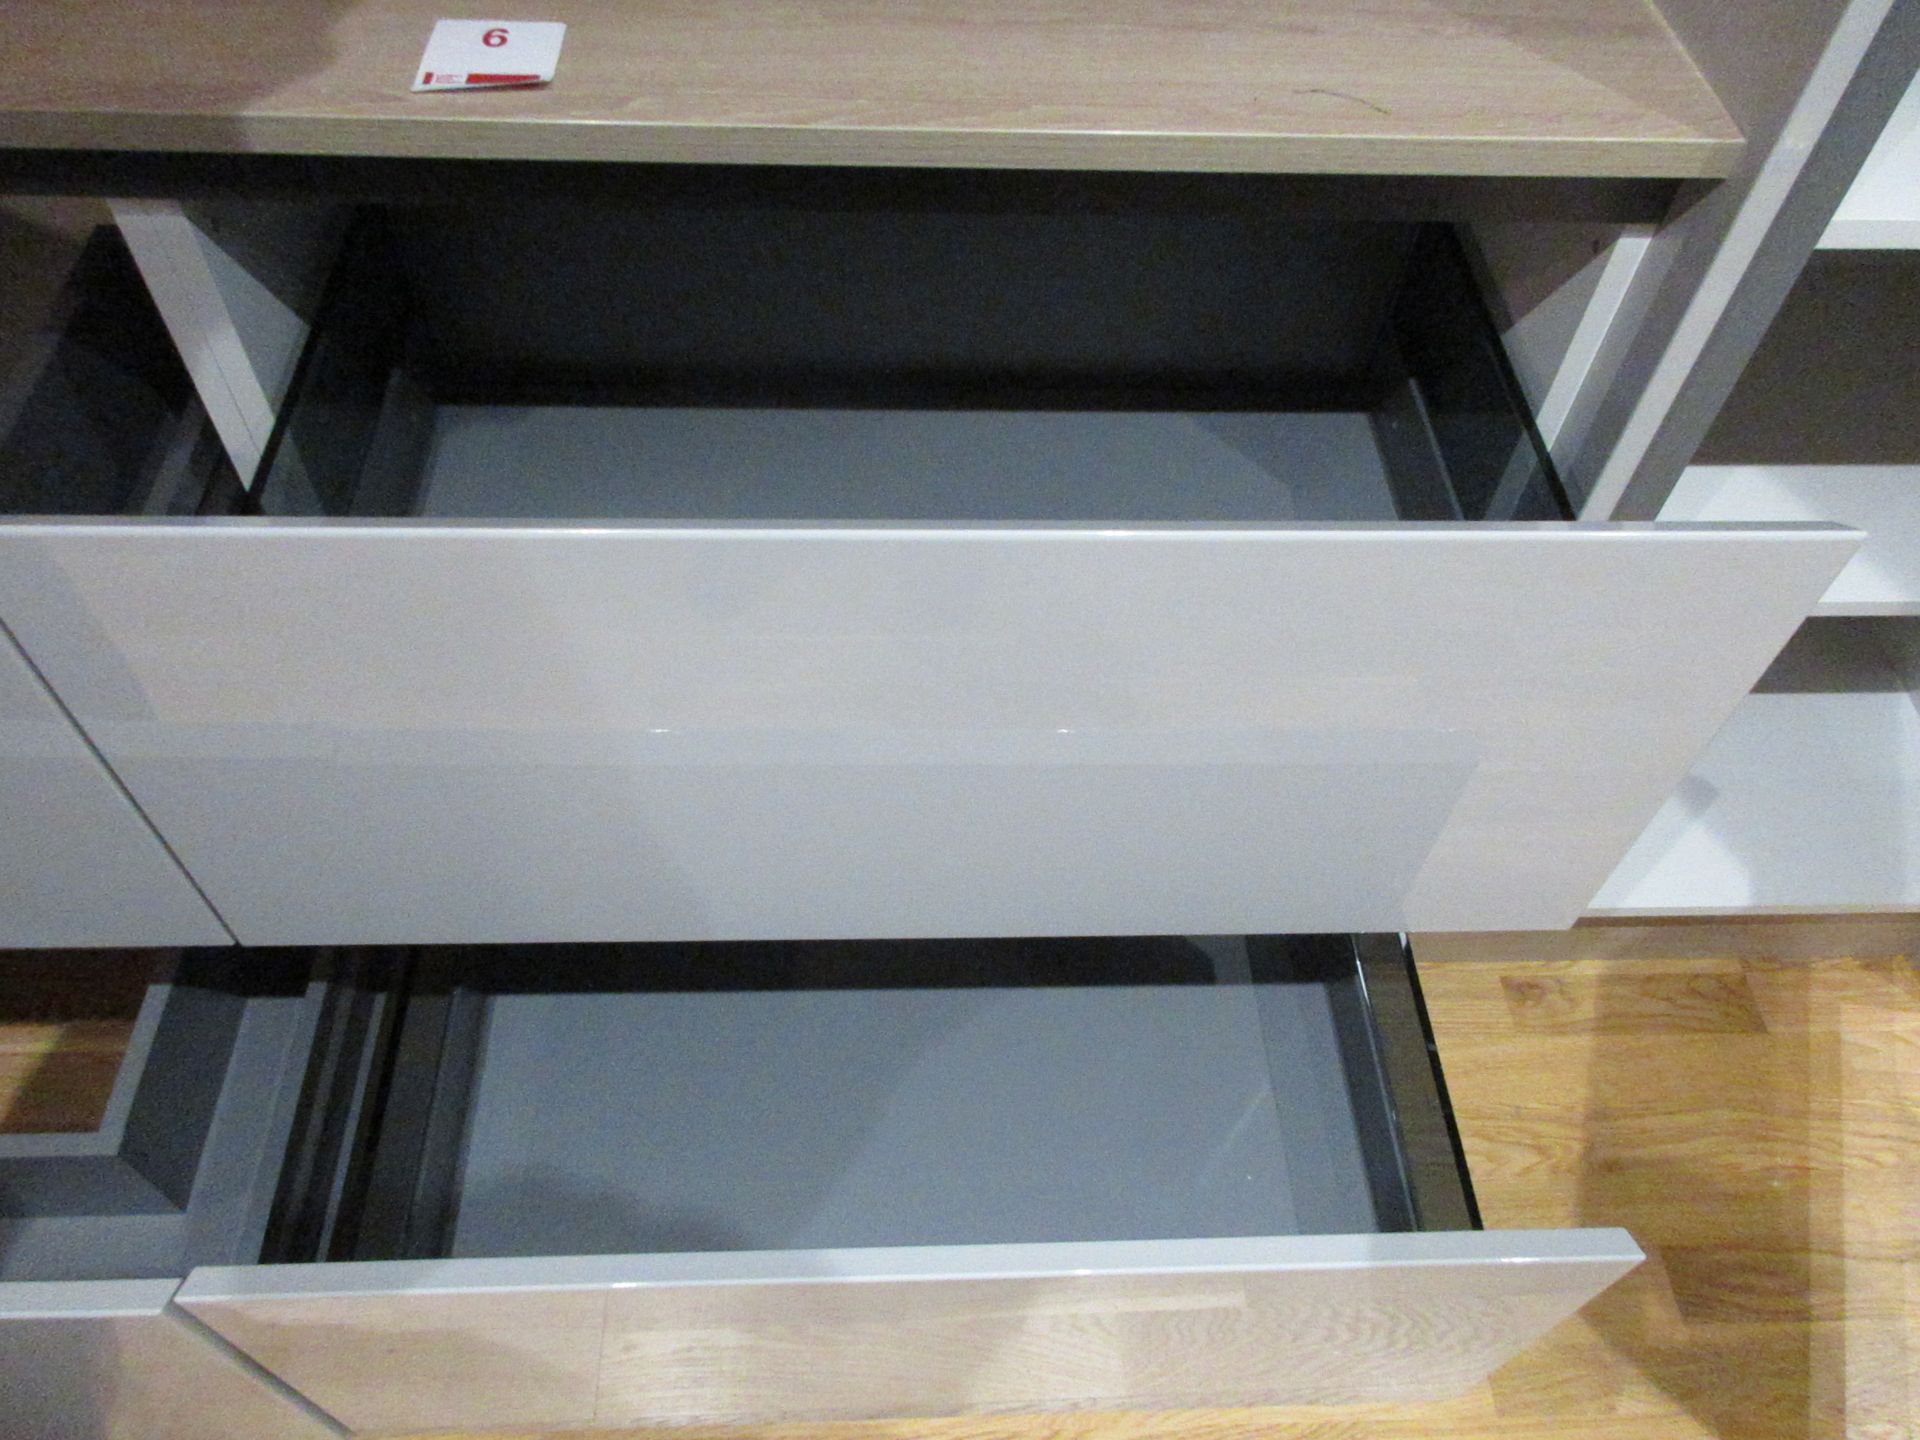 Mackintosh Gloss showroom display kitchen comprising of: - 1 x 800mm sink base unit with 2 - Image 4 of 11